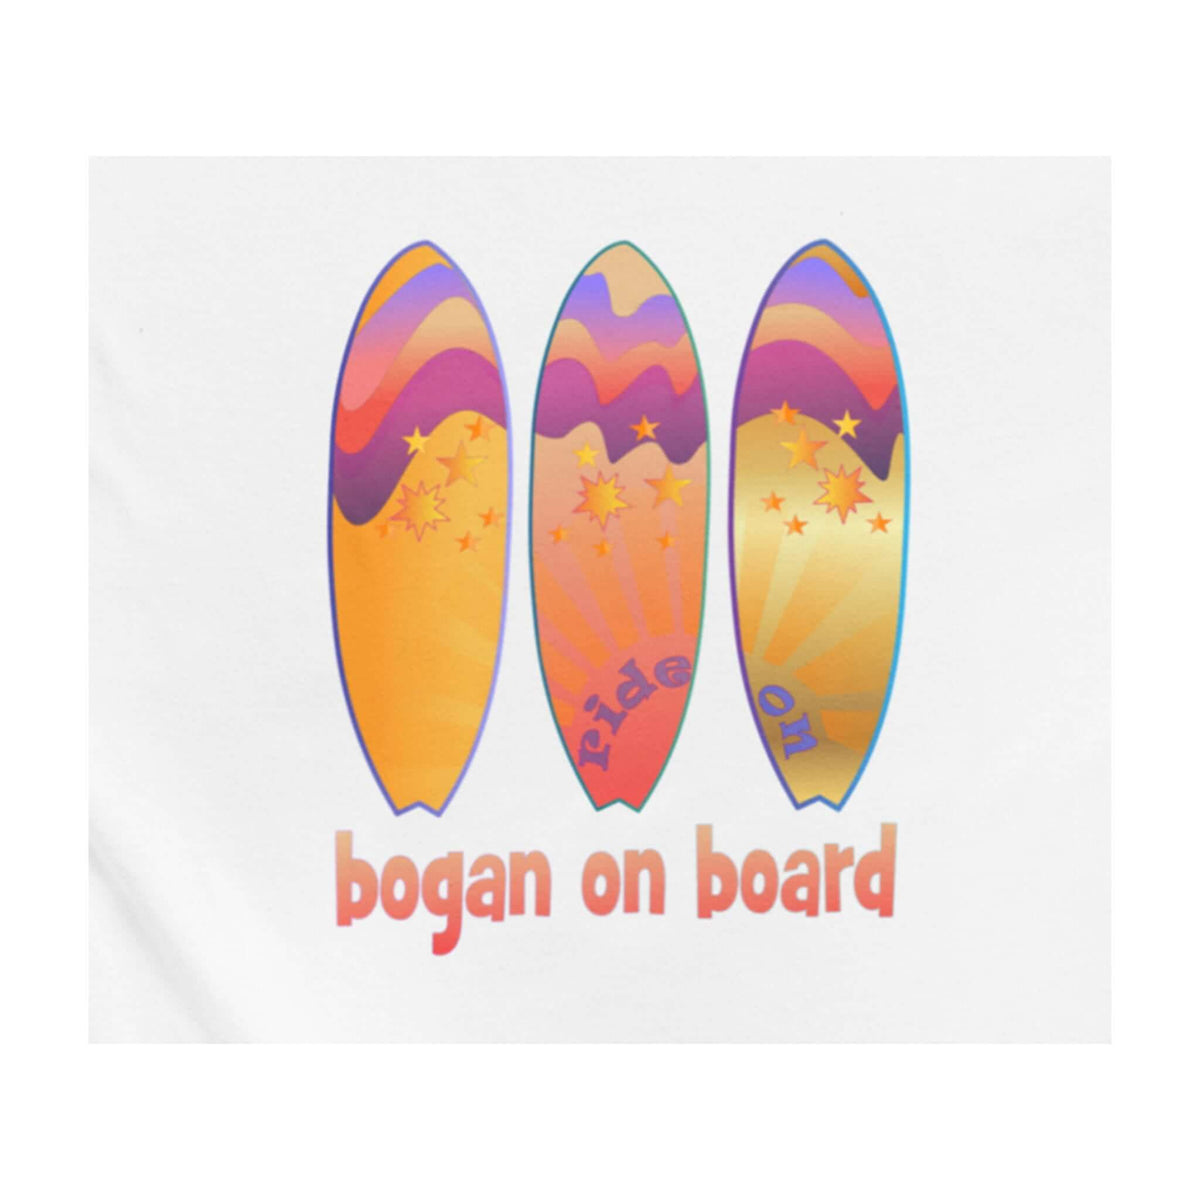 Bogan on Board graphic surfboard design with three bright surfboards